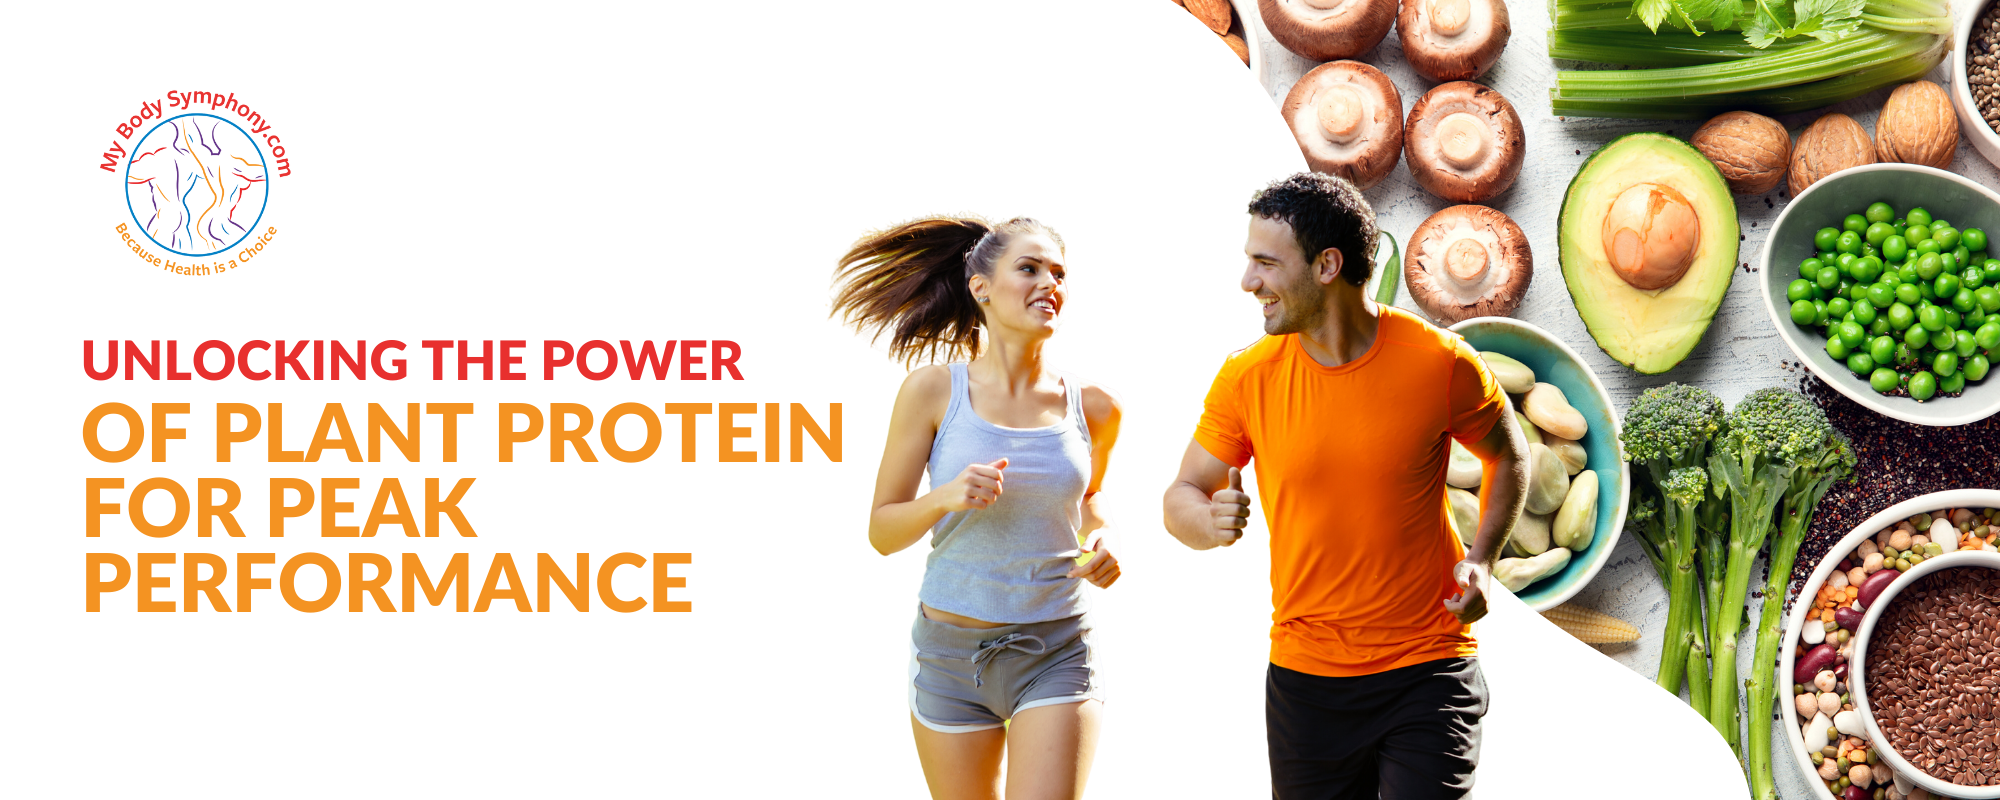 unlocking power of plant protein for peak performance 2